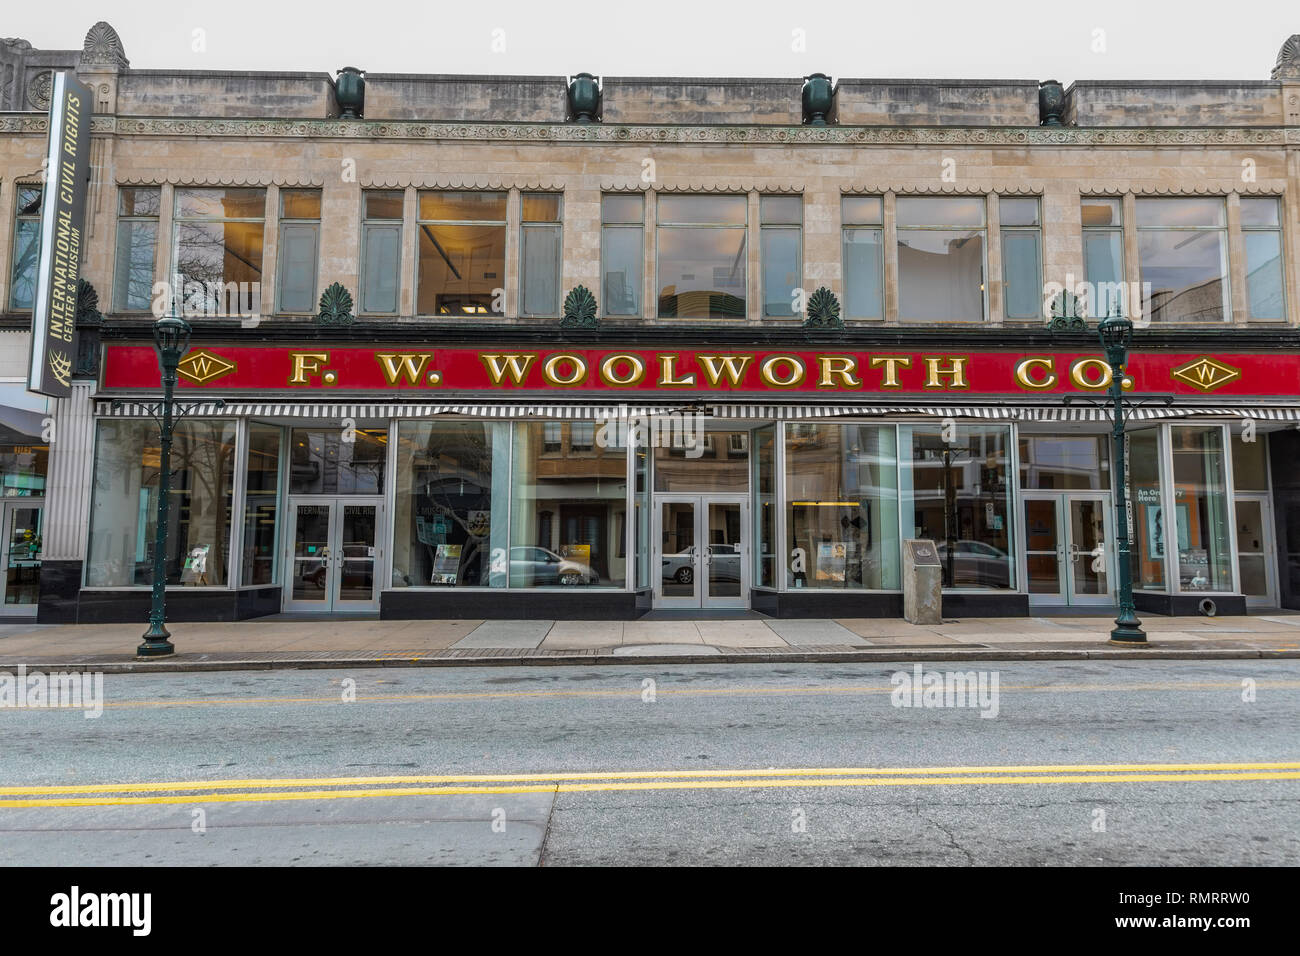 GREENSBORO, NC, USA-2/14/19: The F W. Woolworth building where the first 'sit-in' for integragtion occurred in 1960. Stock Photo